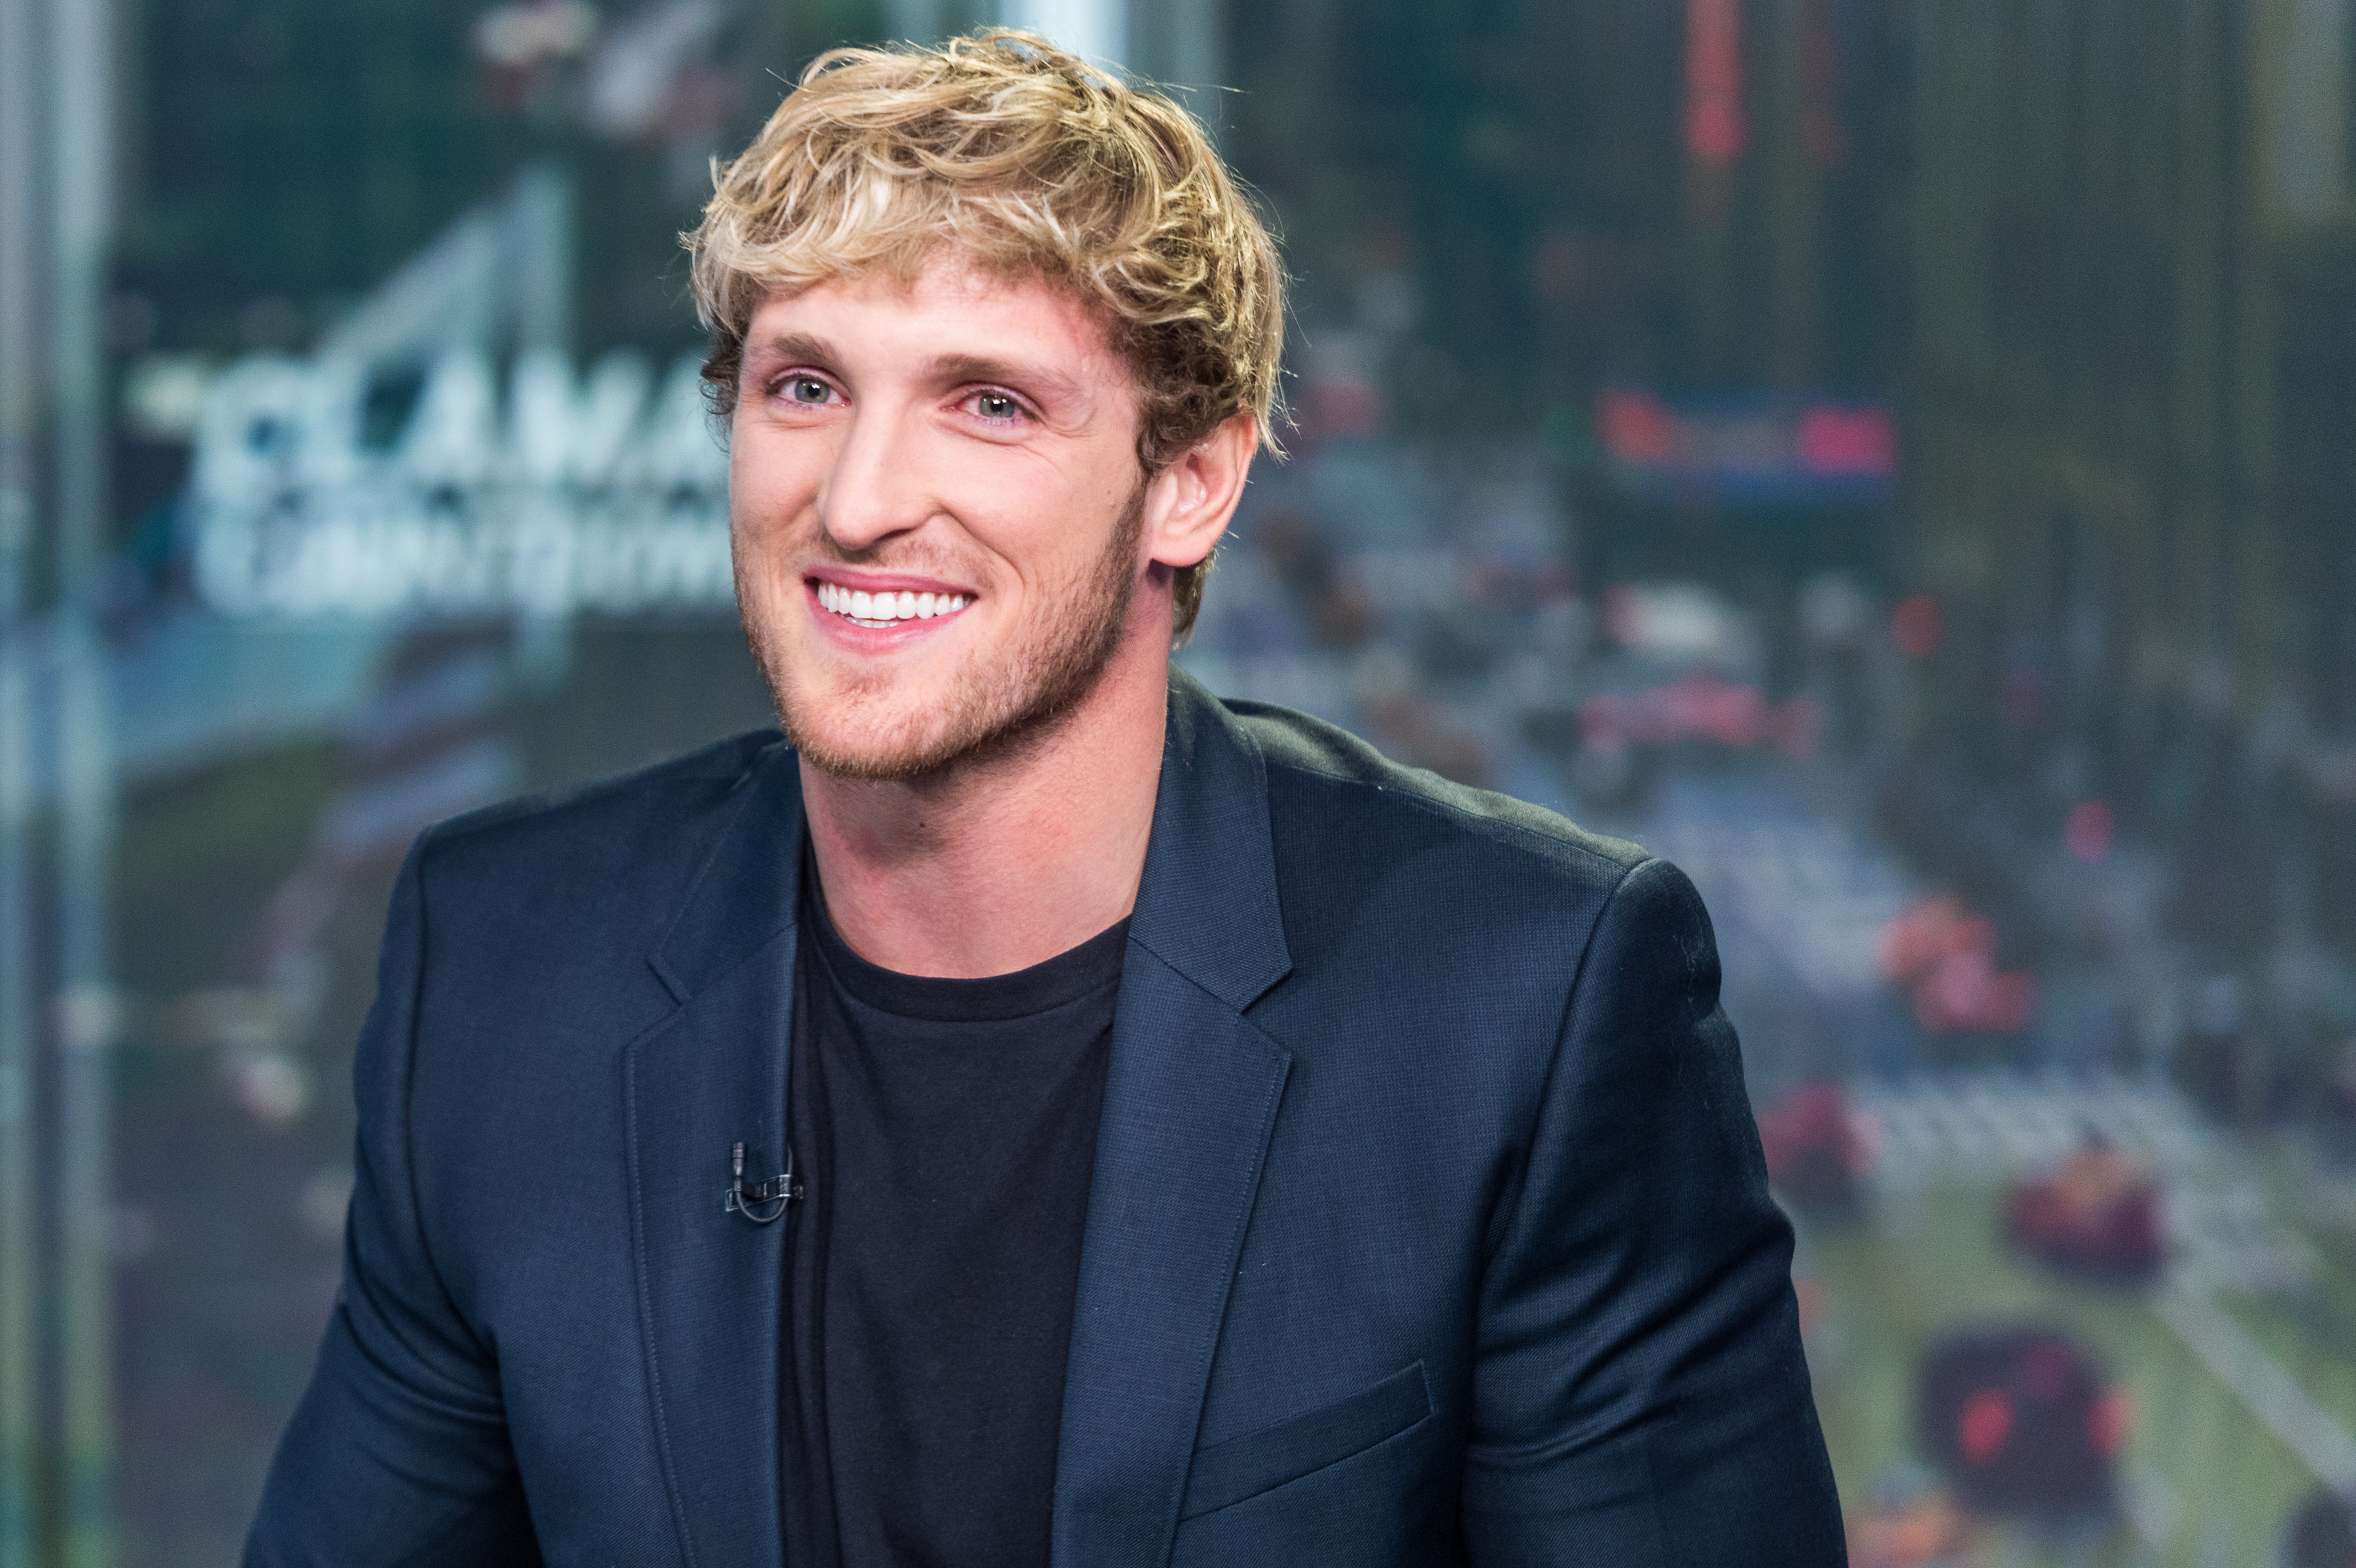 Logan Paul Responds To CryptoZoo “Scam” Accusations